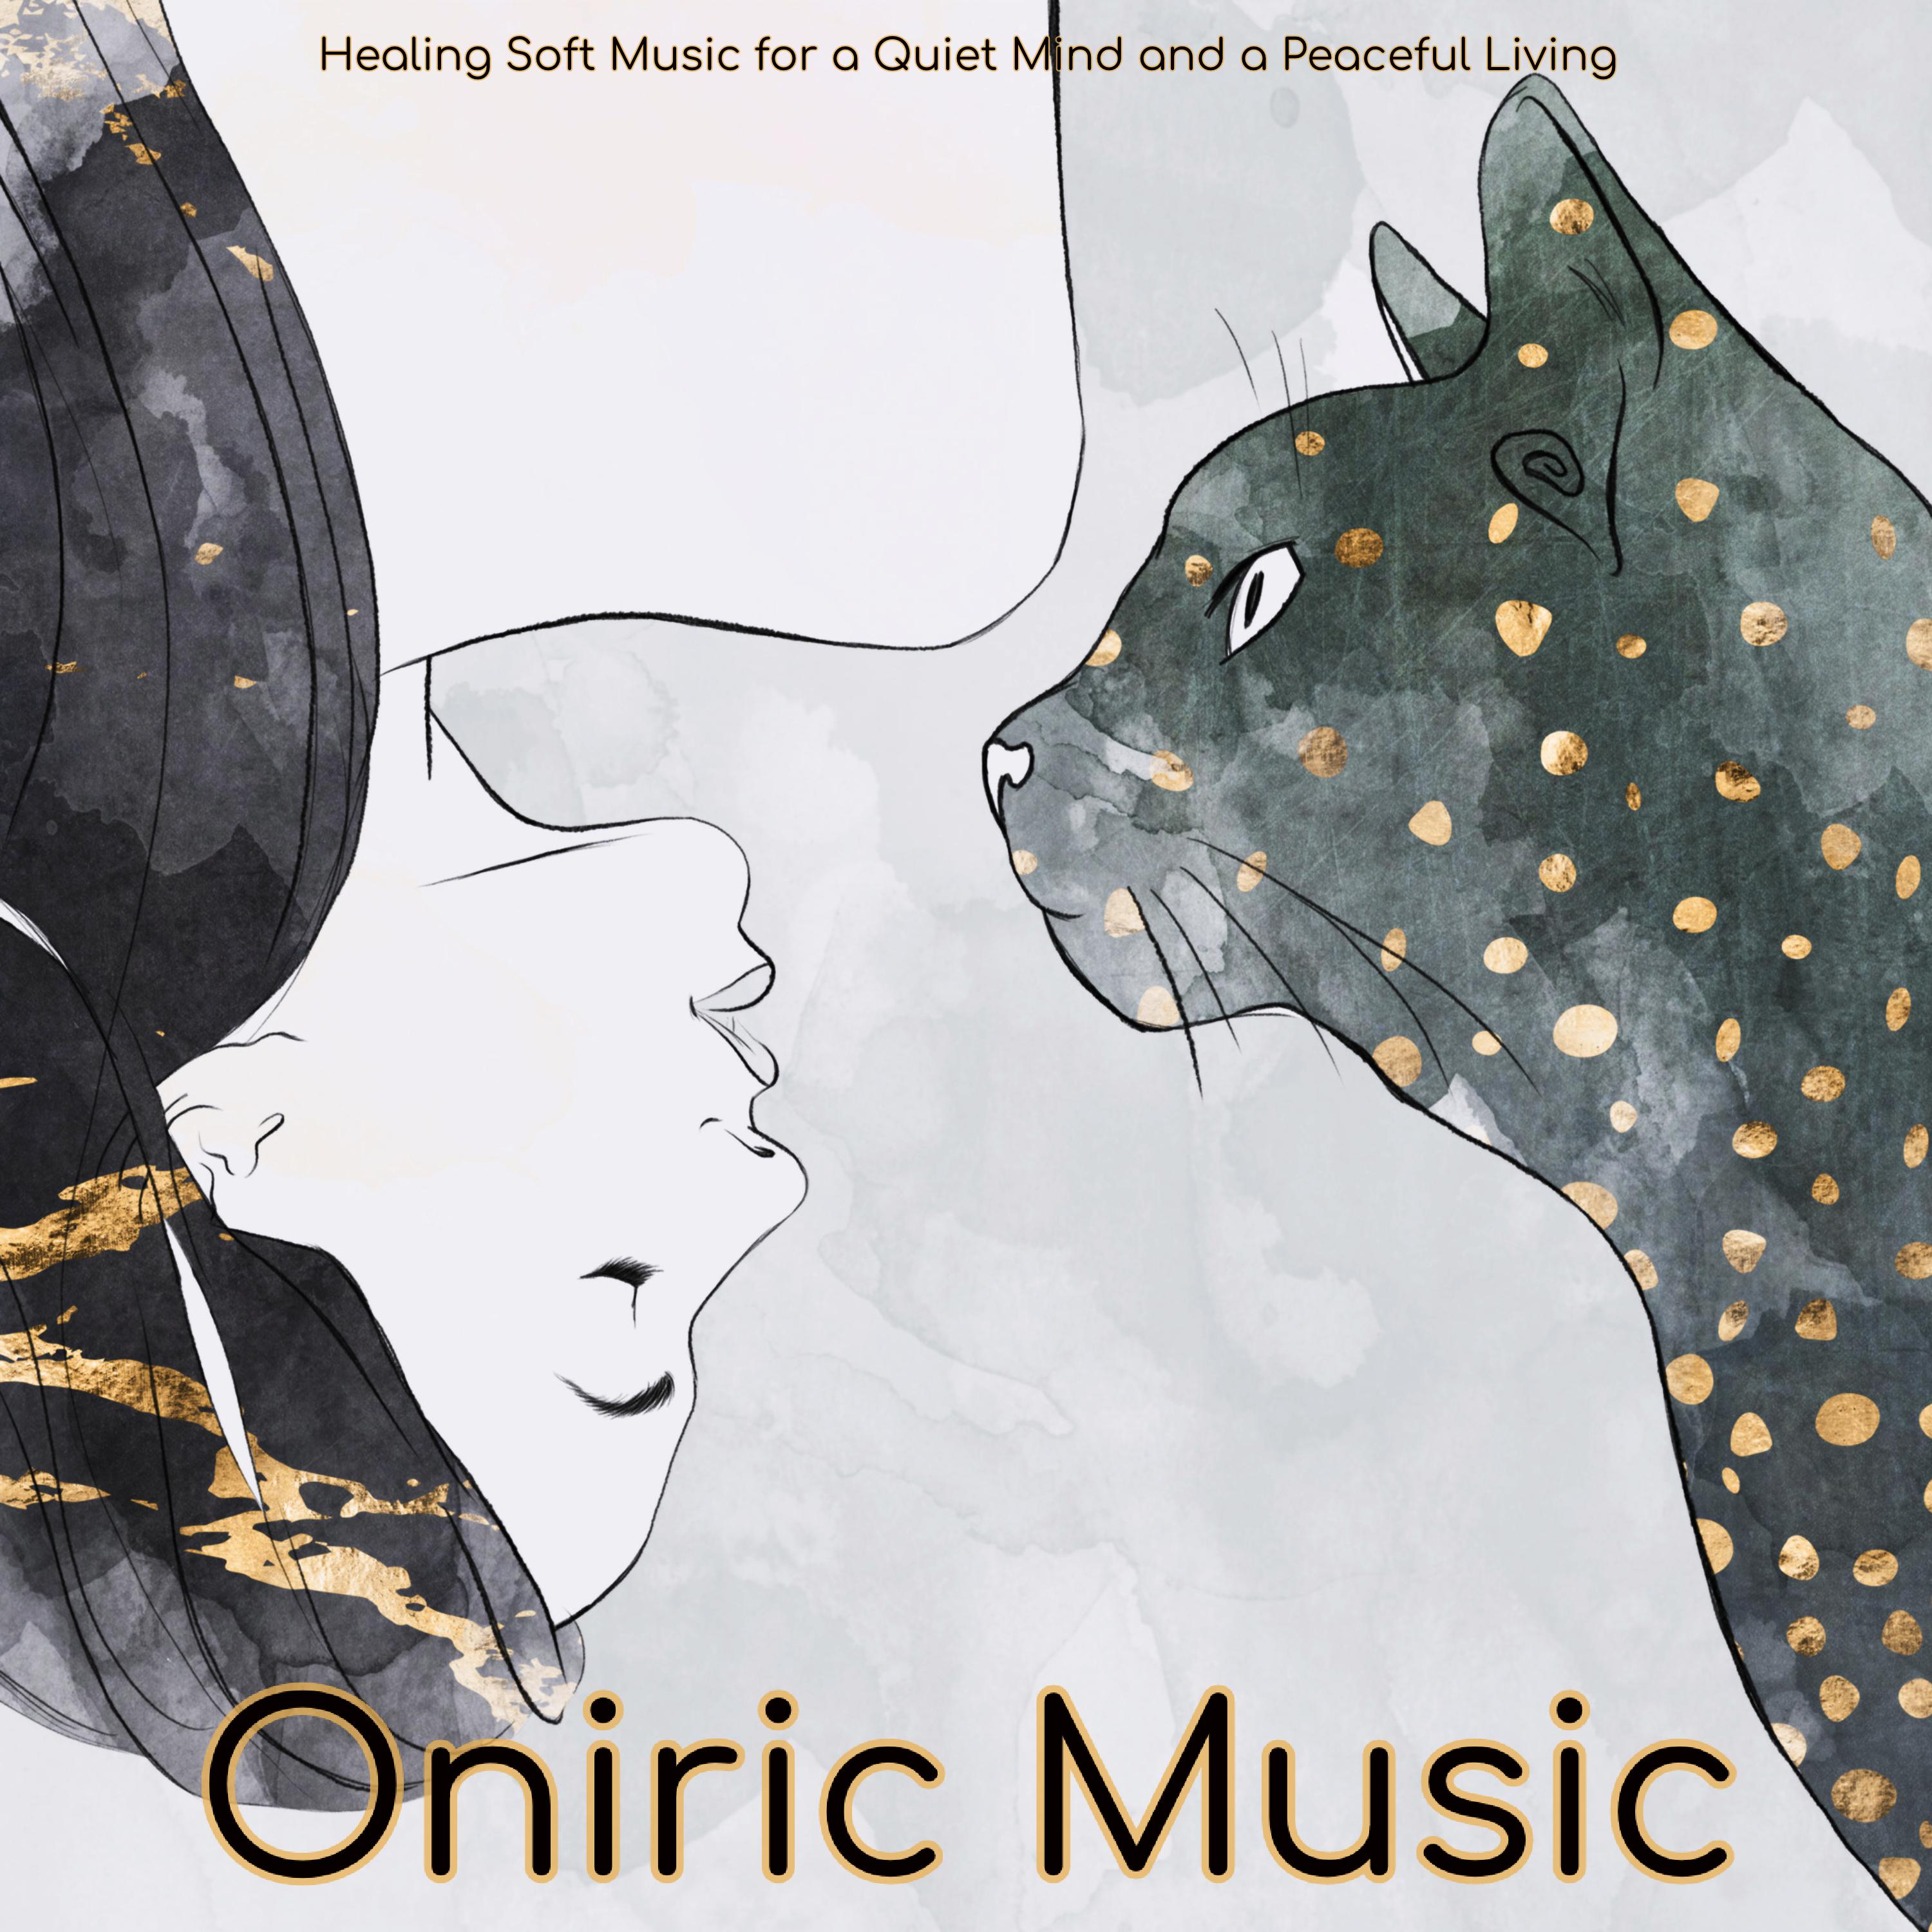 Oniric Music – Healing Soft Music for a Quiet Mind and a Peaceful Living